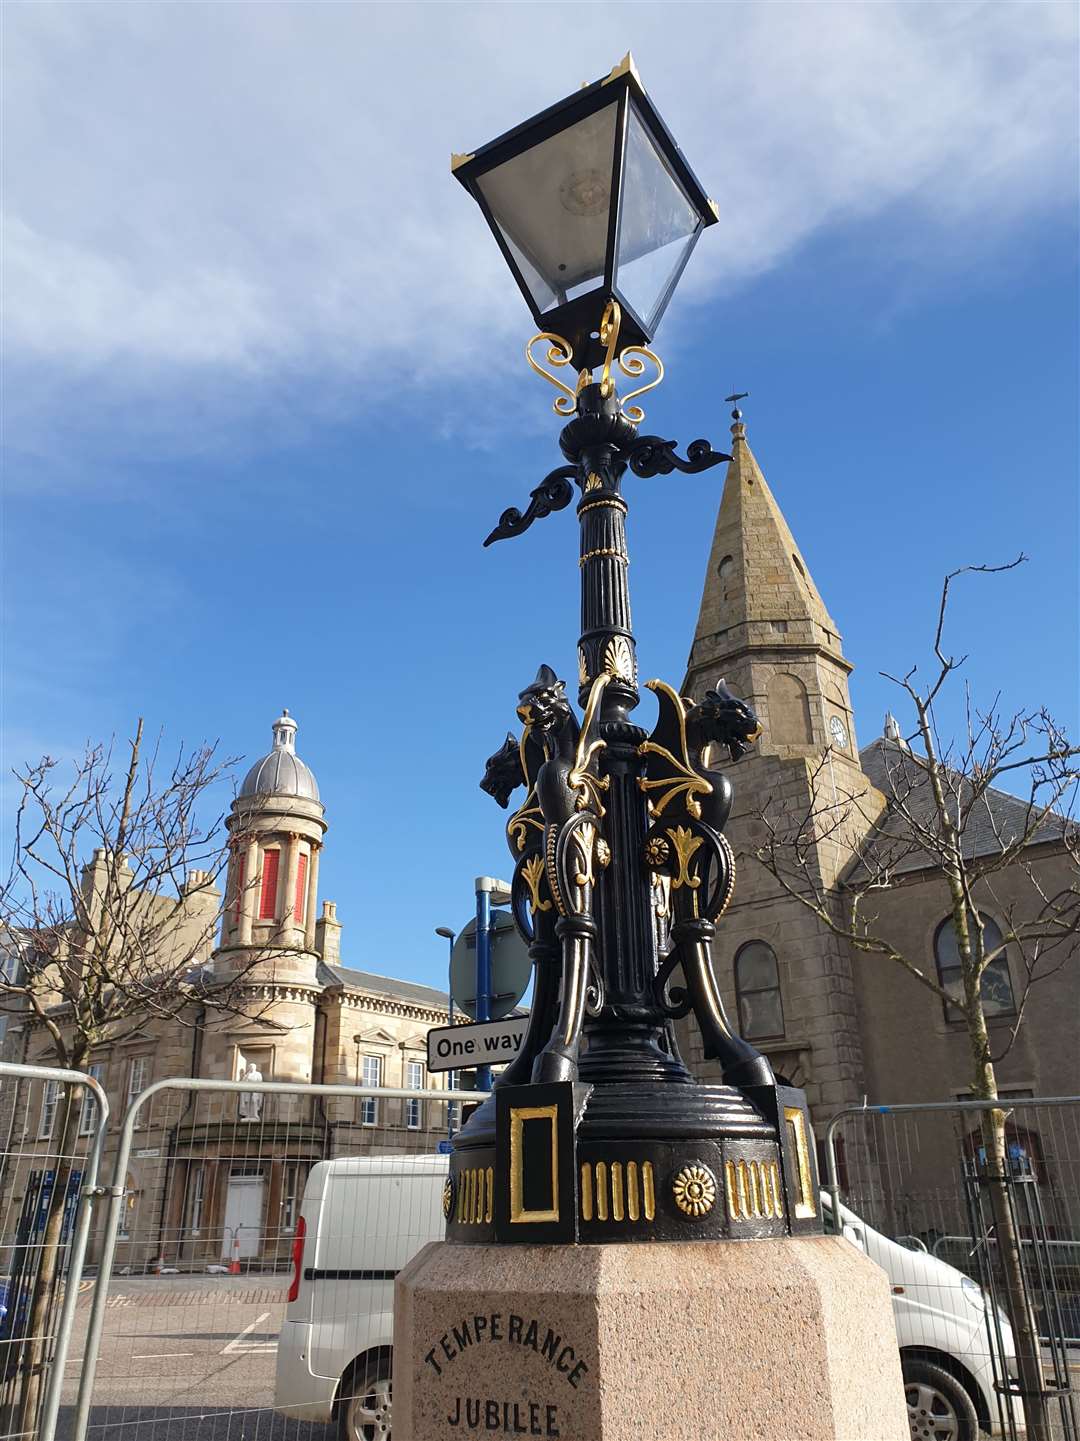 The Temperance fountain will be switched on.